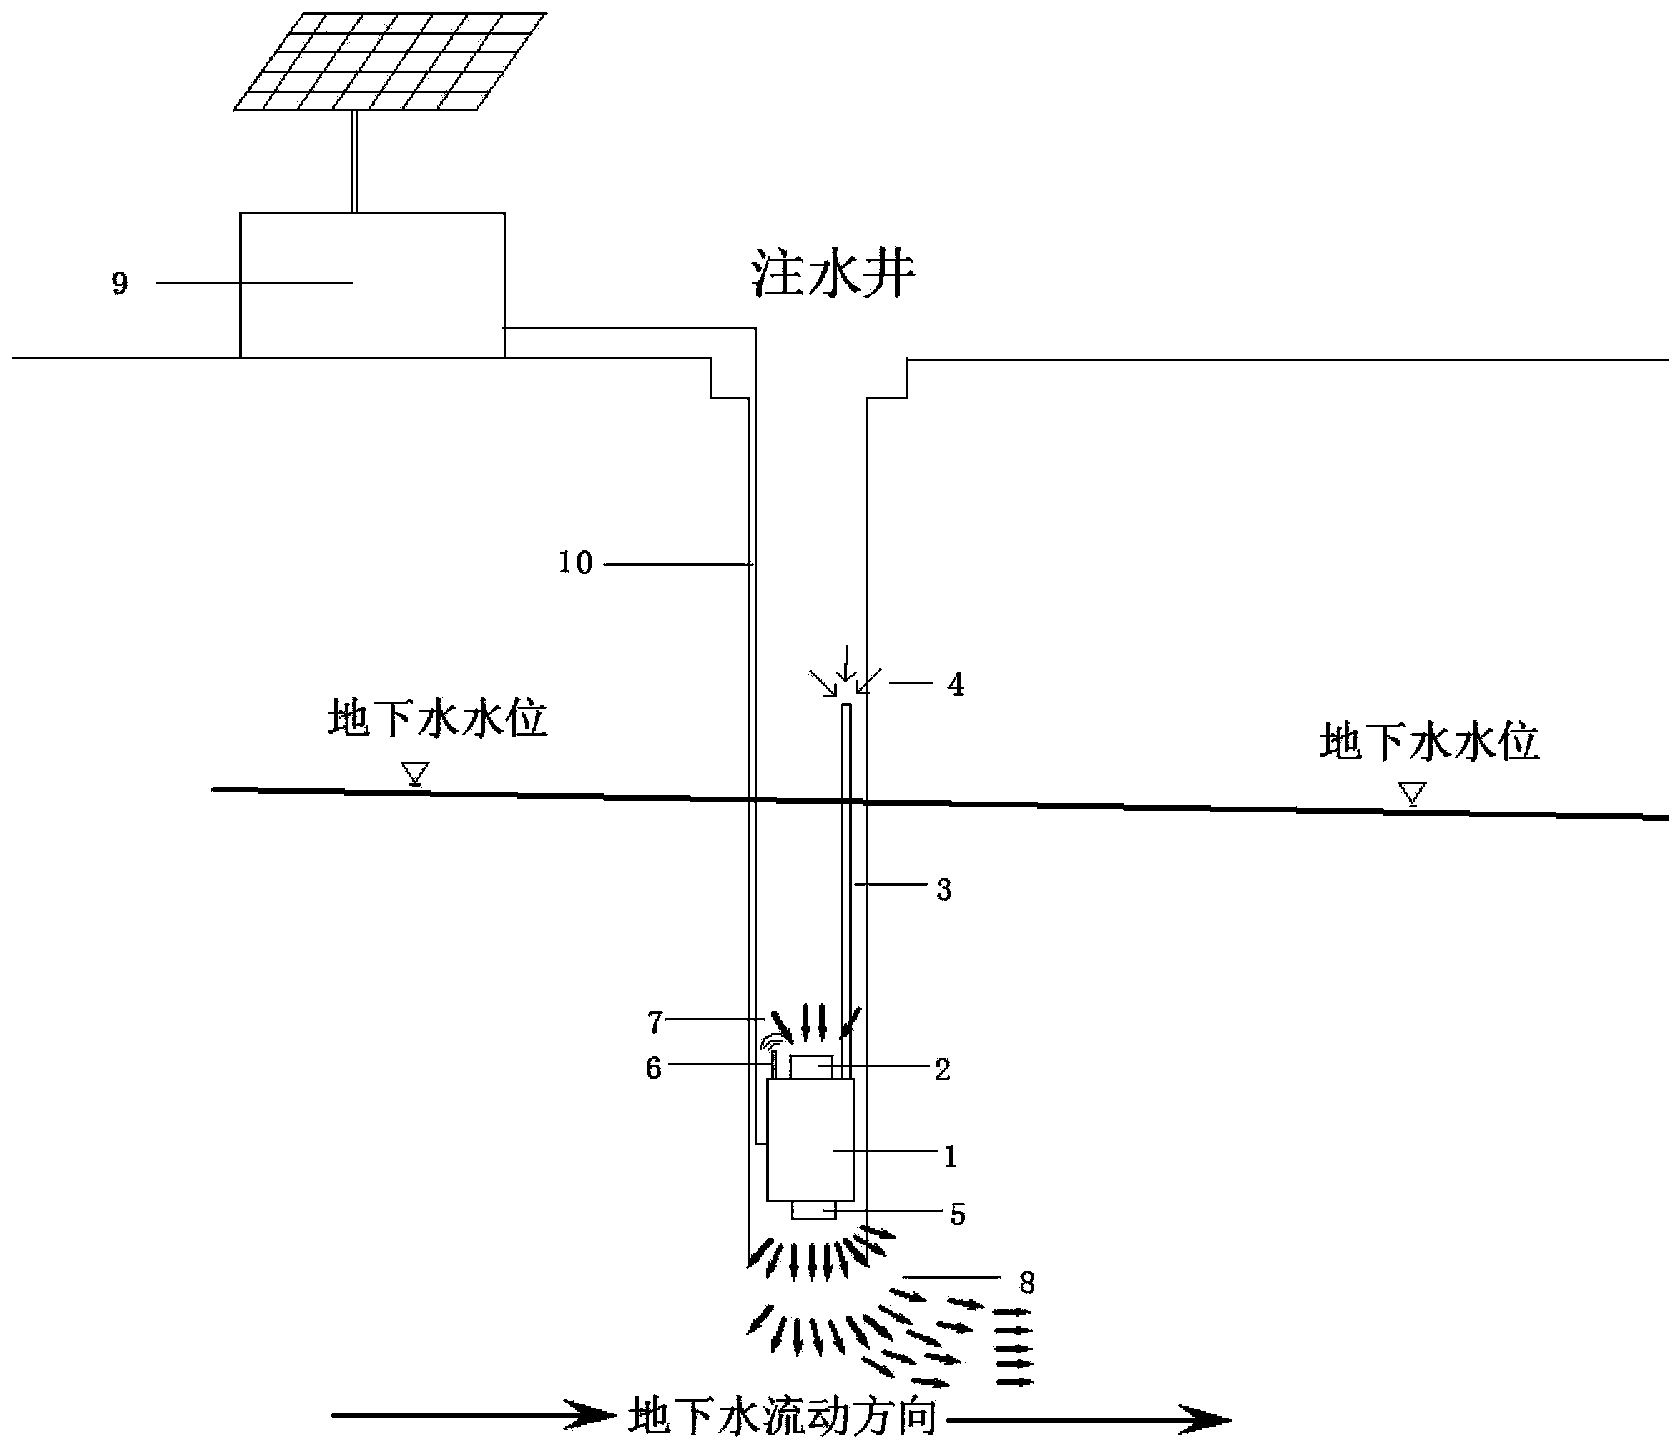 Method and system using micro-nanometer bubbles to repair underground water in in-situ mode